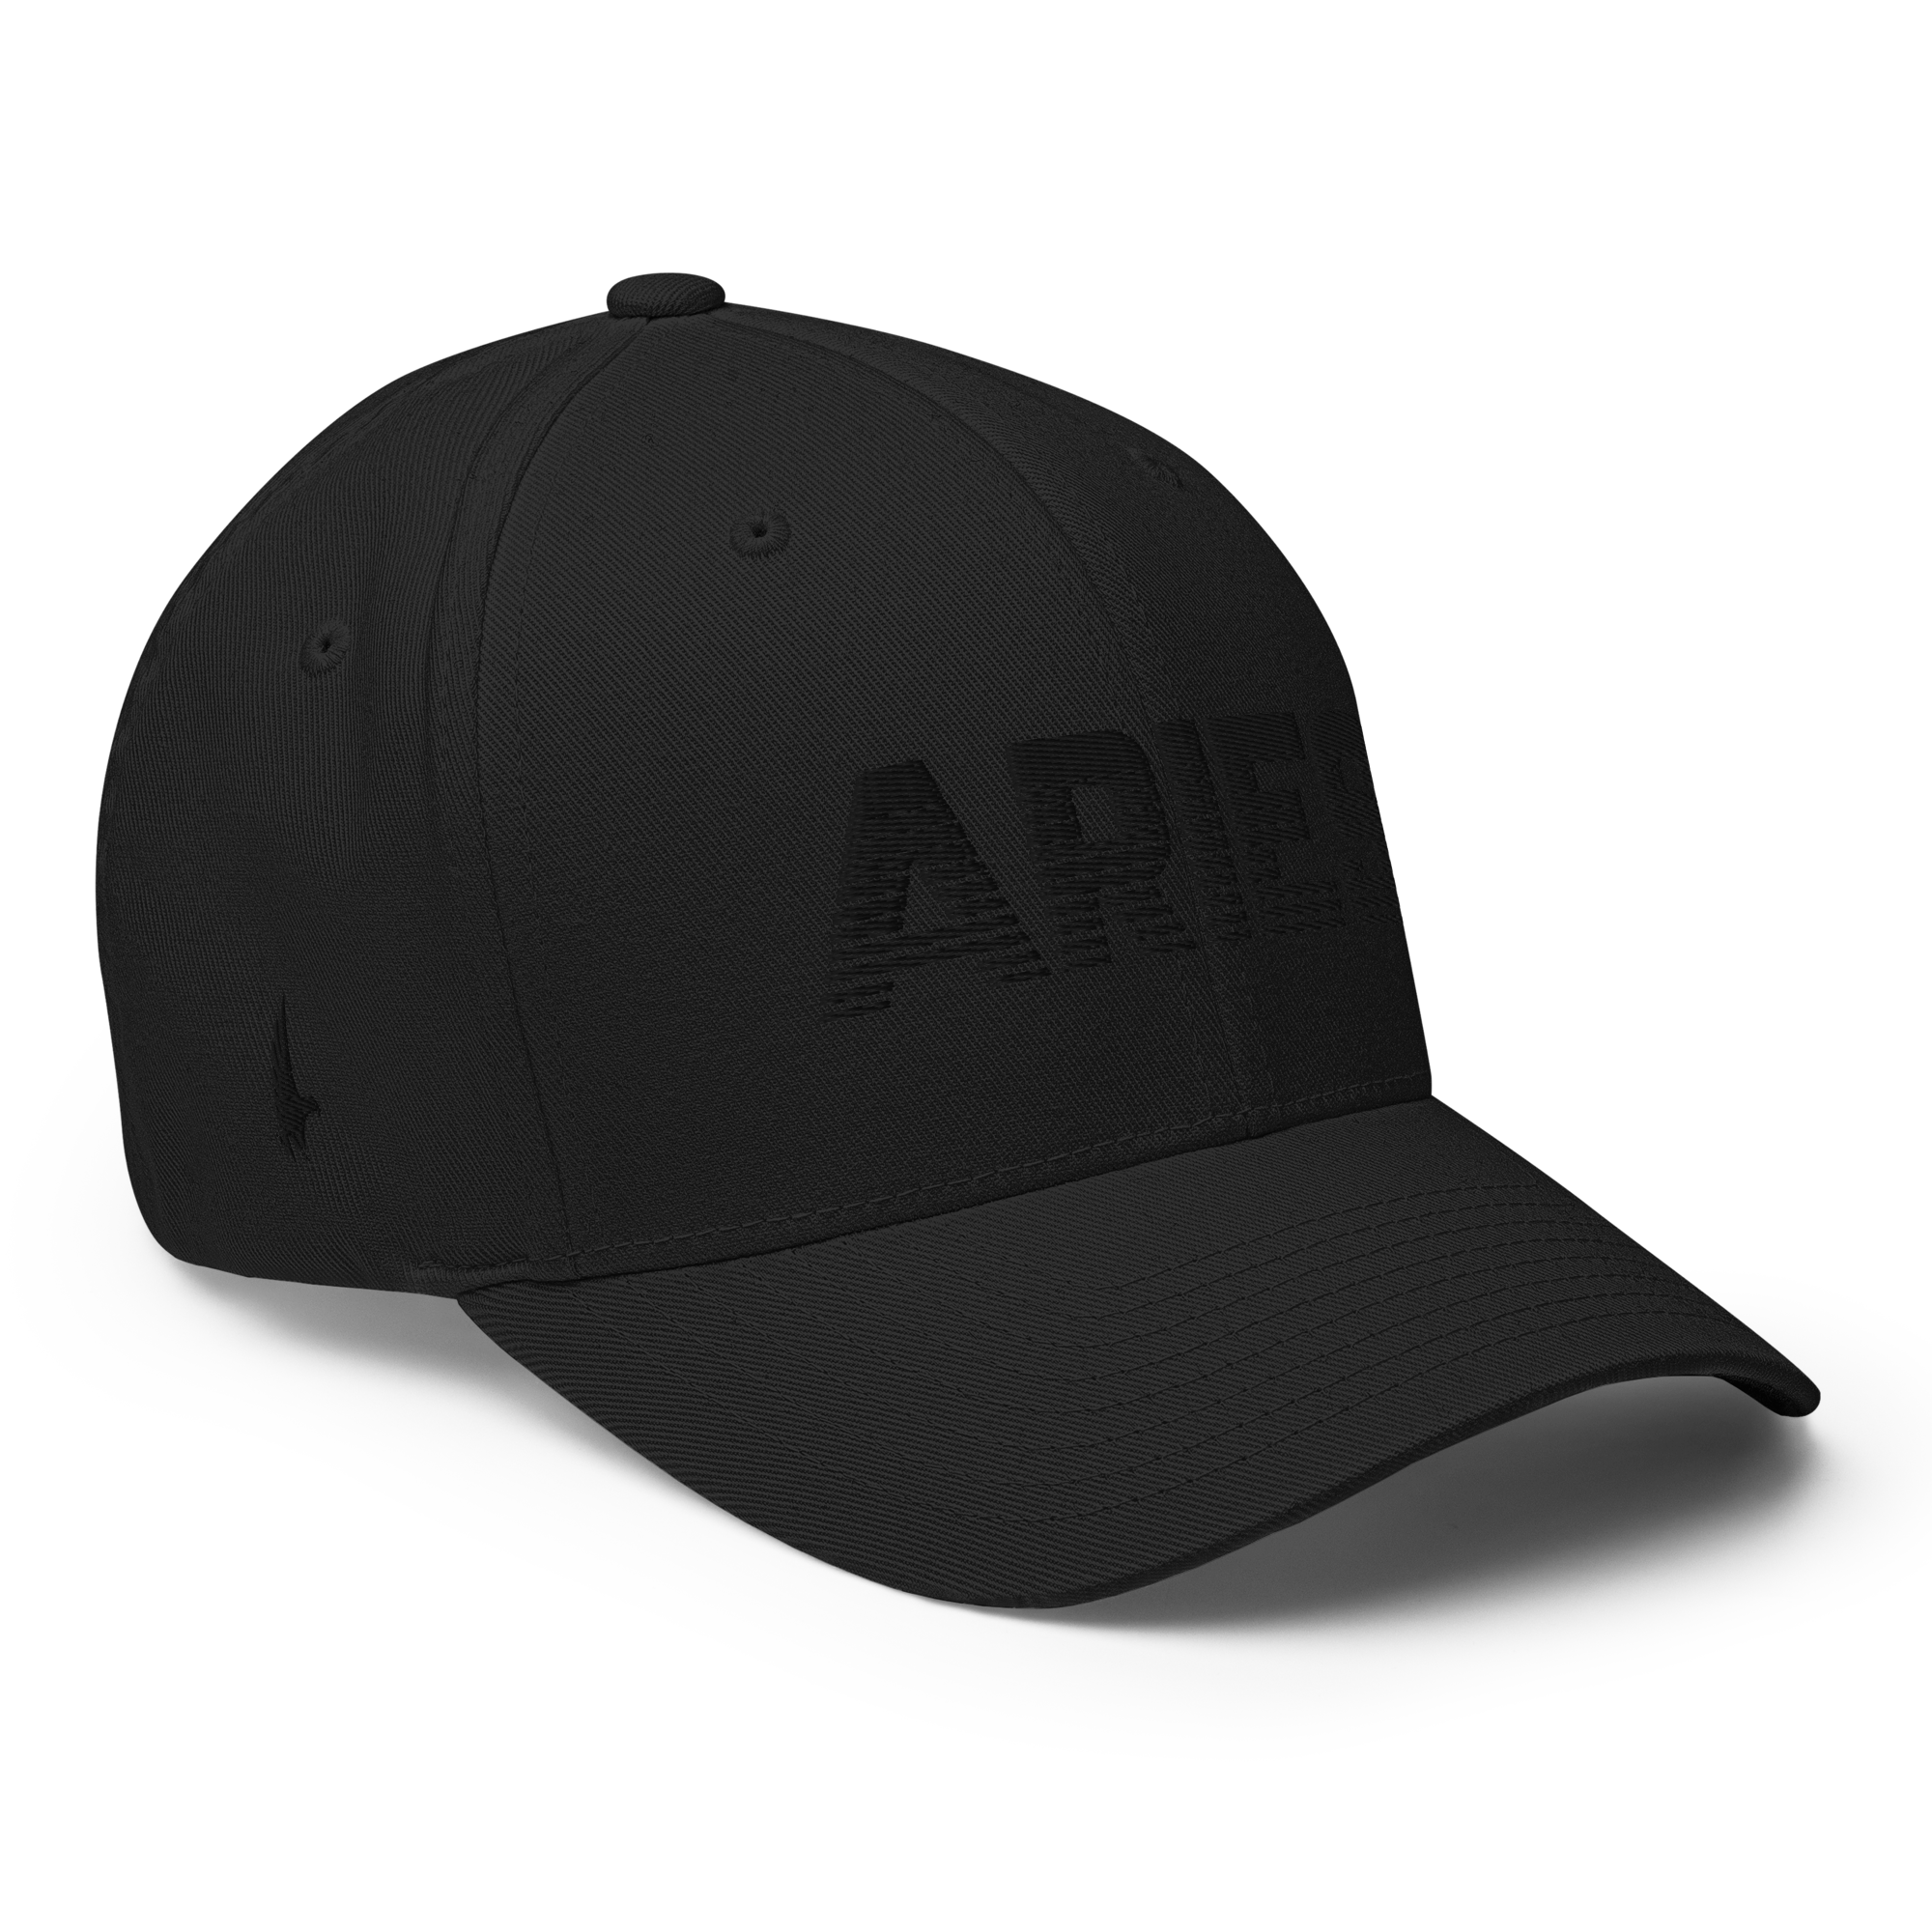 Aries Fitted Hat Black/Black Fitted - Loyalty Vibes